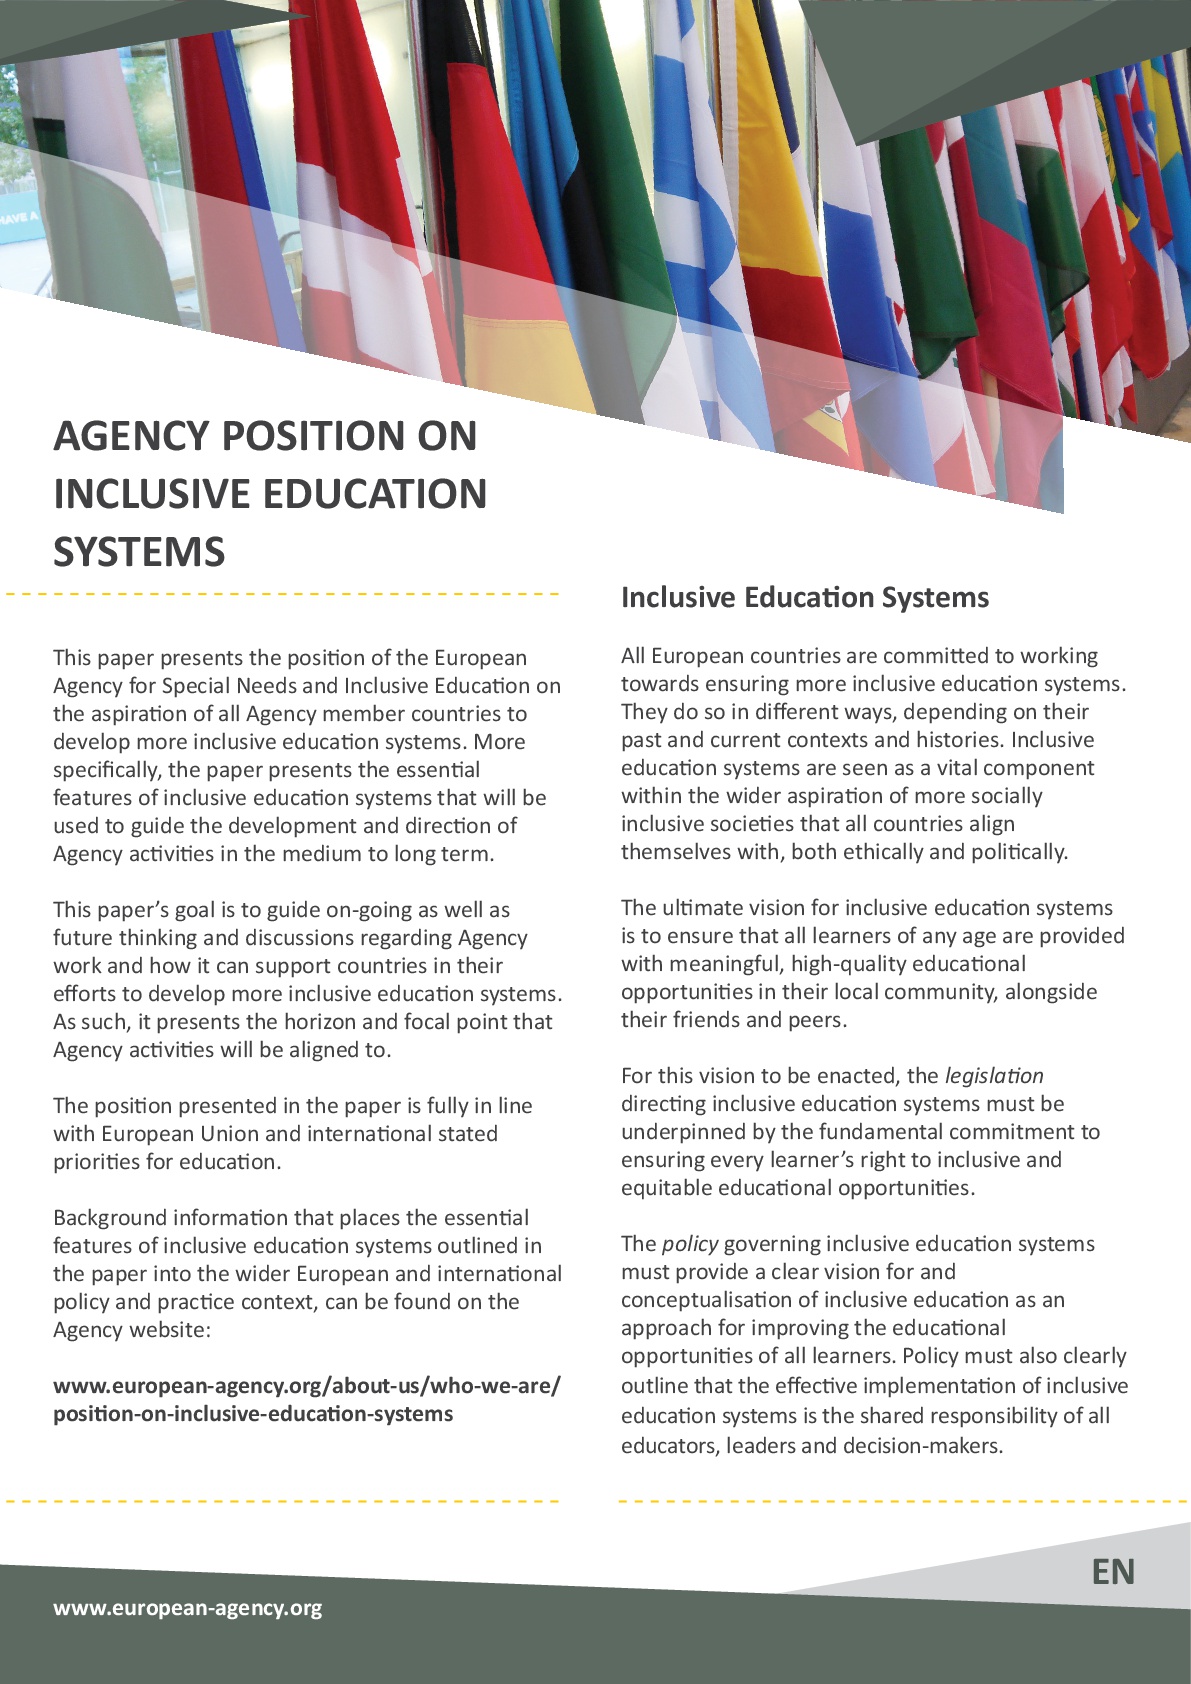 Agency position on inclusive education systems